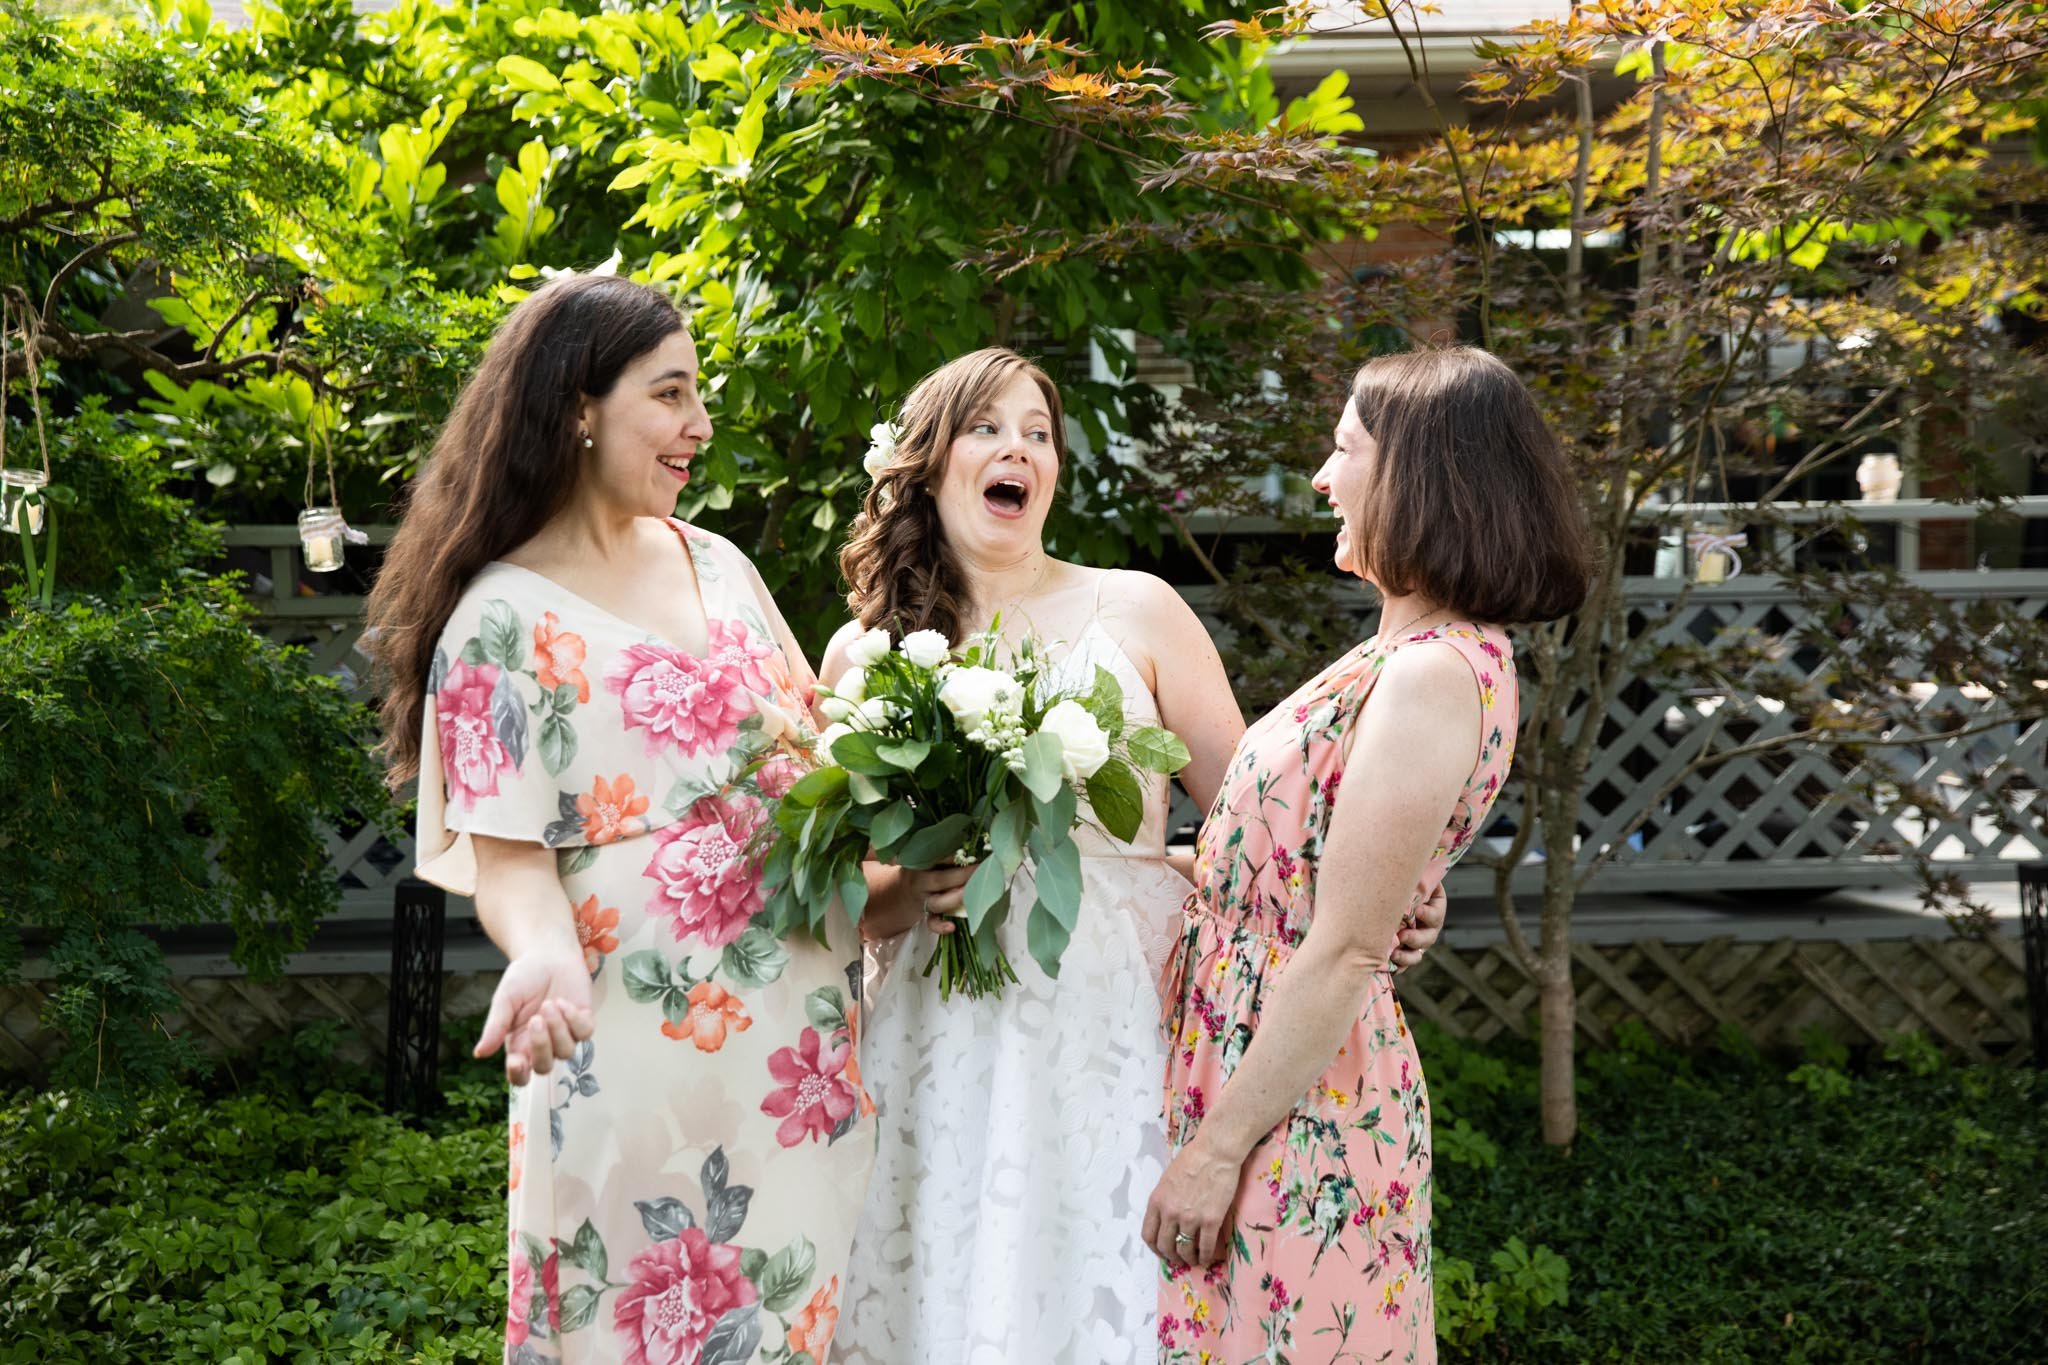 bride and friends laughing outside.jpg